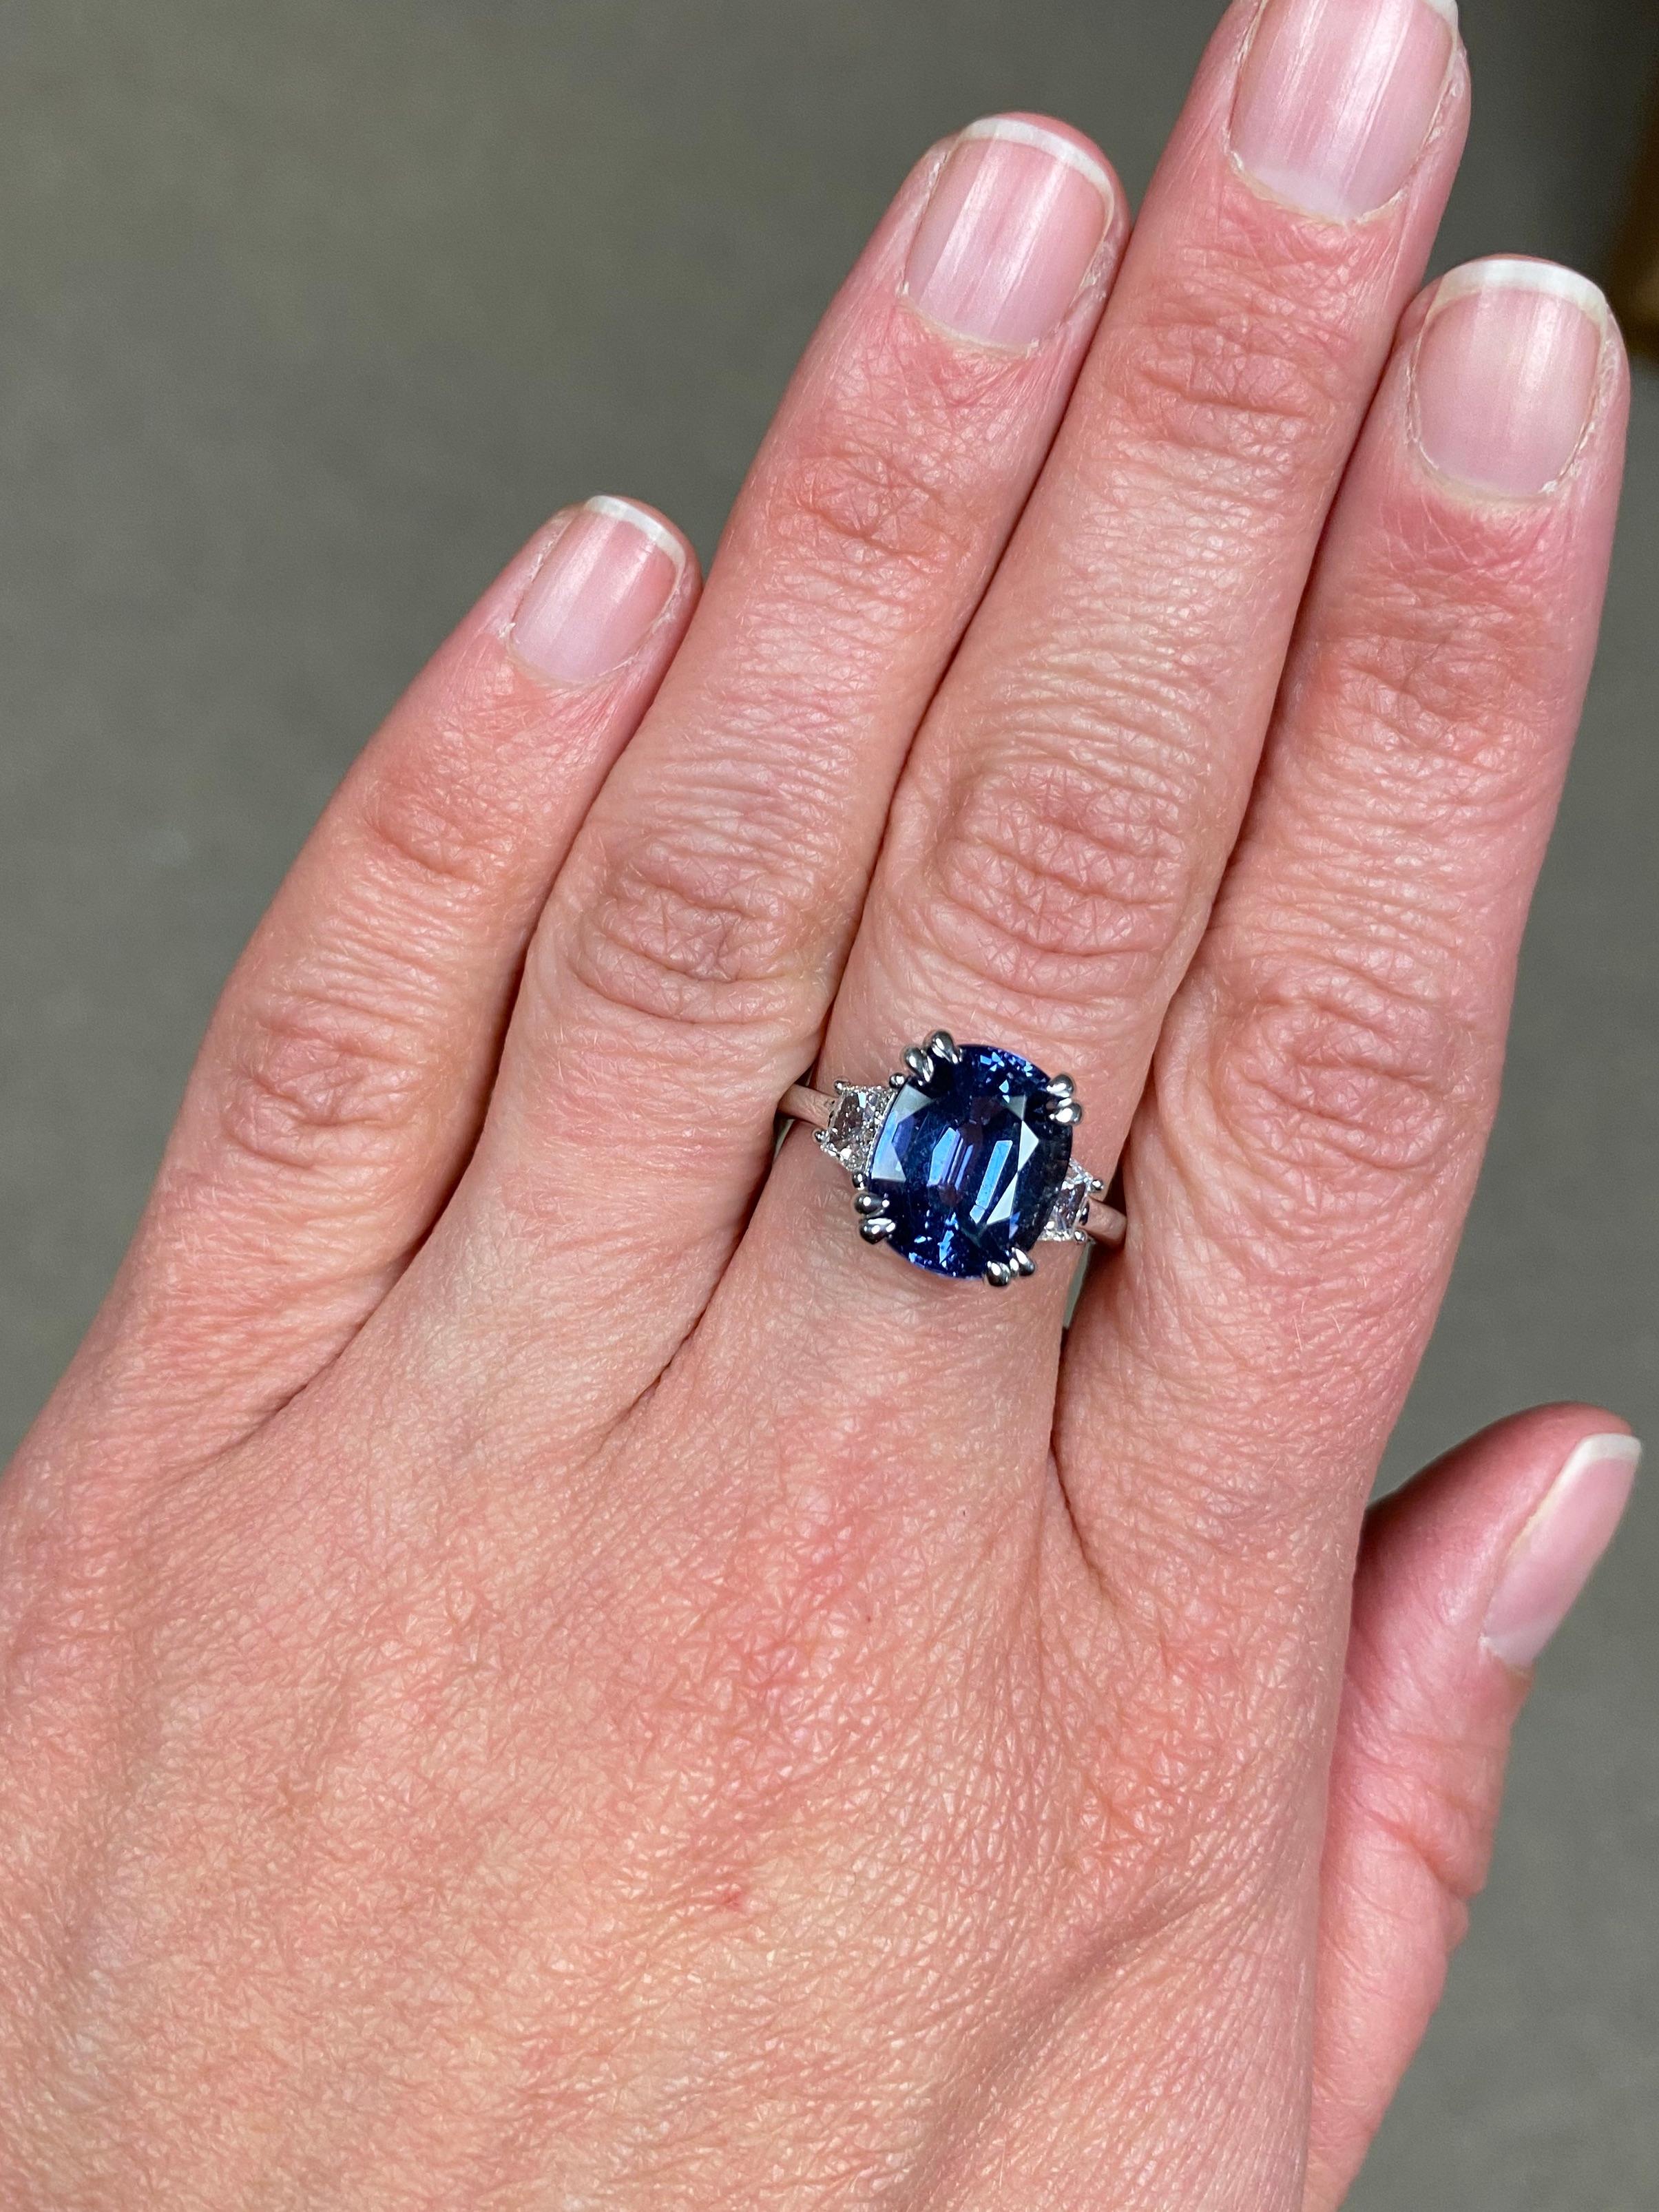 GIA Unheated Color Change Tanzanian Sapphire and Diamond Cocktail Ring For Sale 6